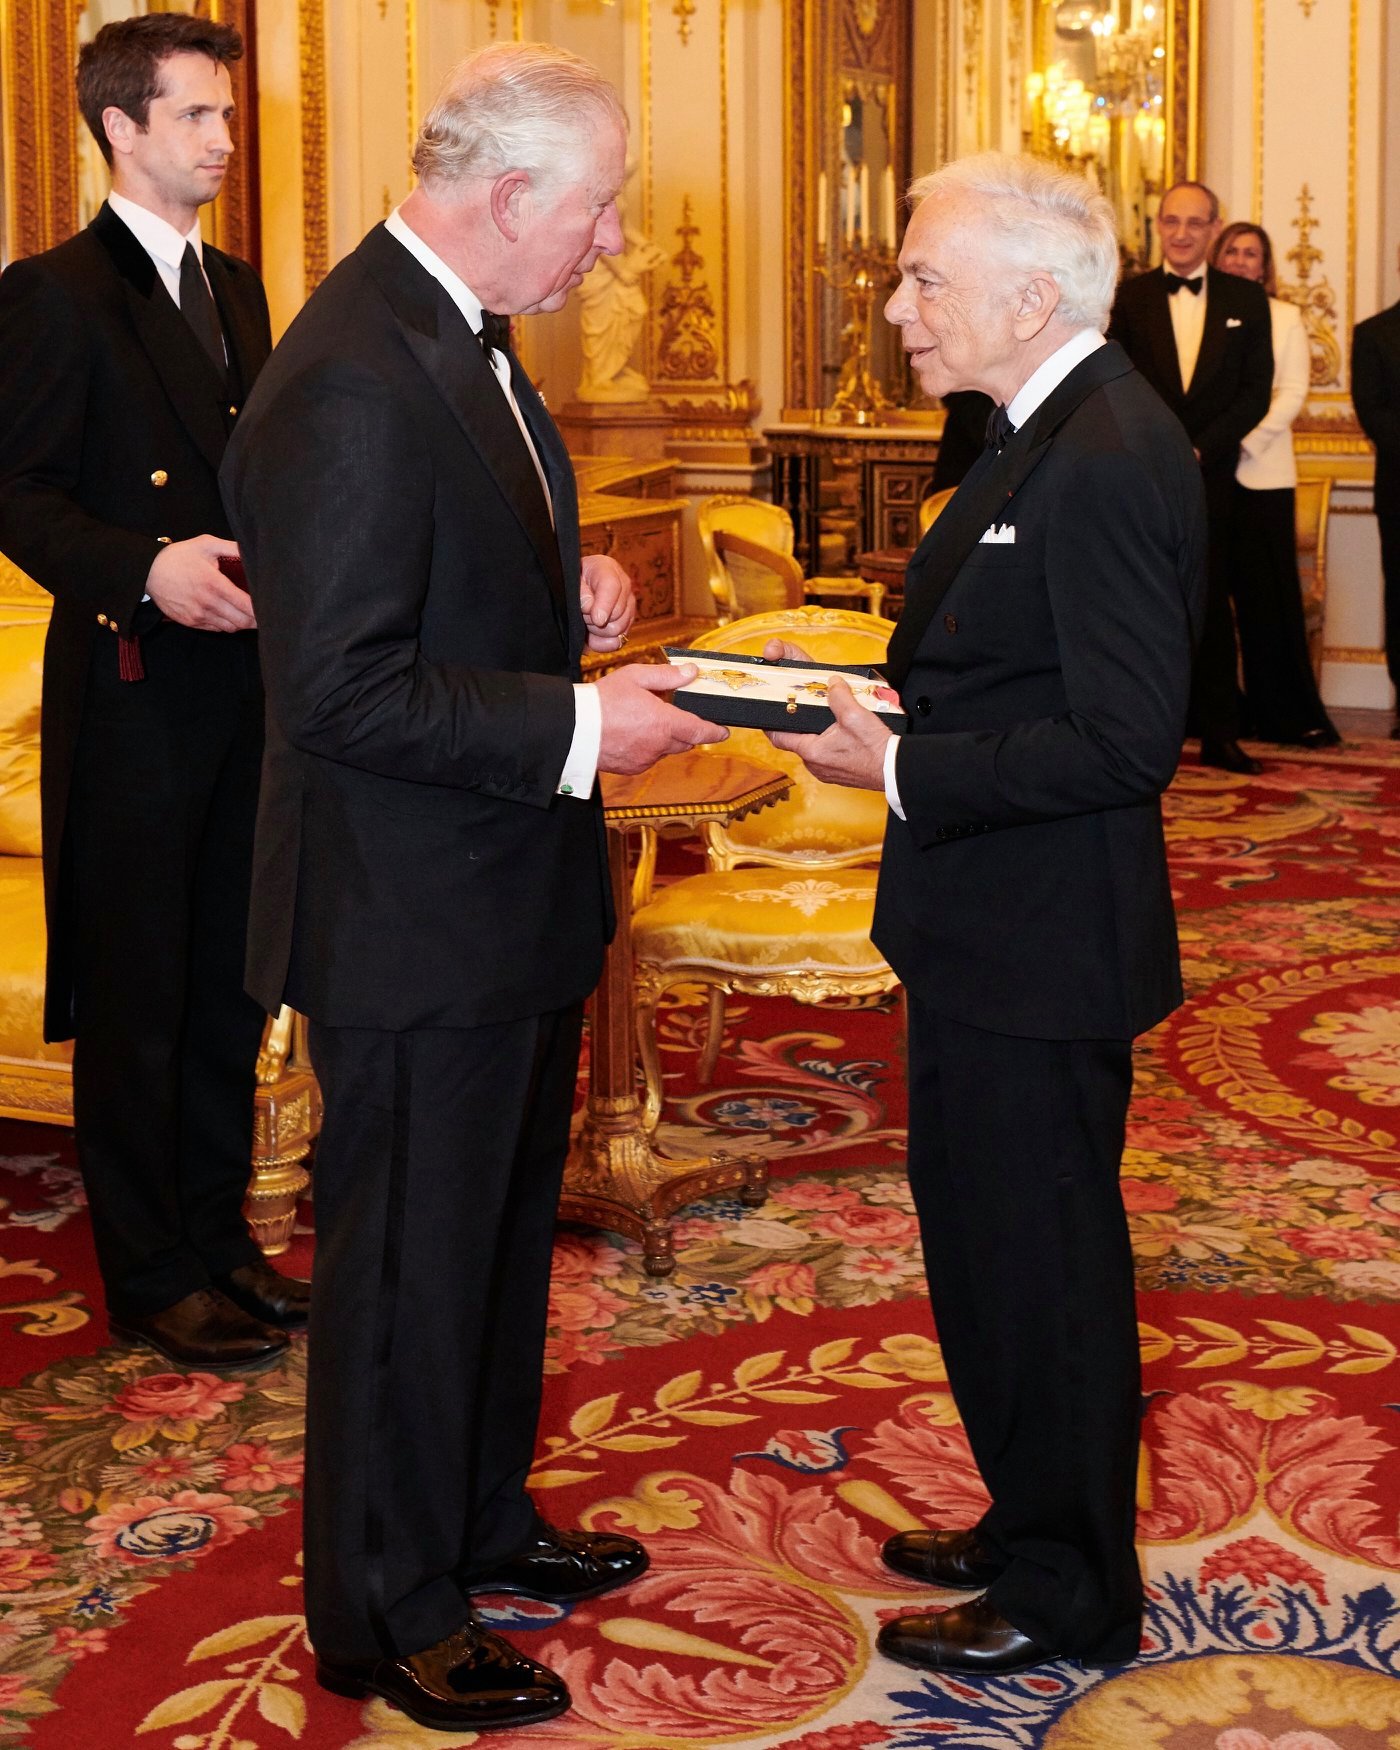 In a private ceremony hosted by His Royal Highness The Prince of Wales, Ralph Lauren was presented with the knighthood insignia of Honorary Knight Commander of the Most Excellent Order of the British Empire, in recognition of his extensive philanthropic efforts, his unparalleled influence on the landscape of global style, and his long-time love of the culture, heritage, and people of Great Britain. #RalphLauren #RL50 Explore the link below for more about the ceremony:...